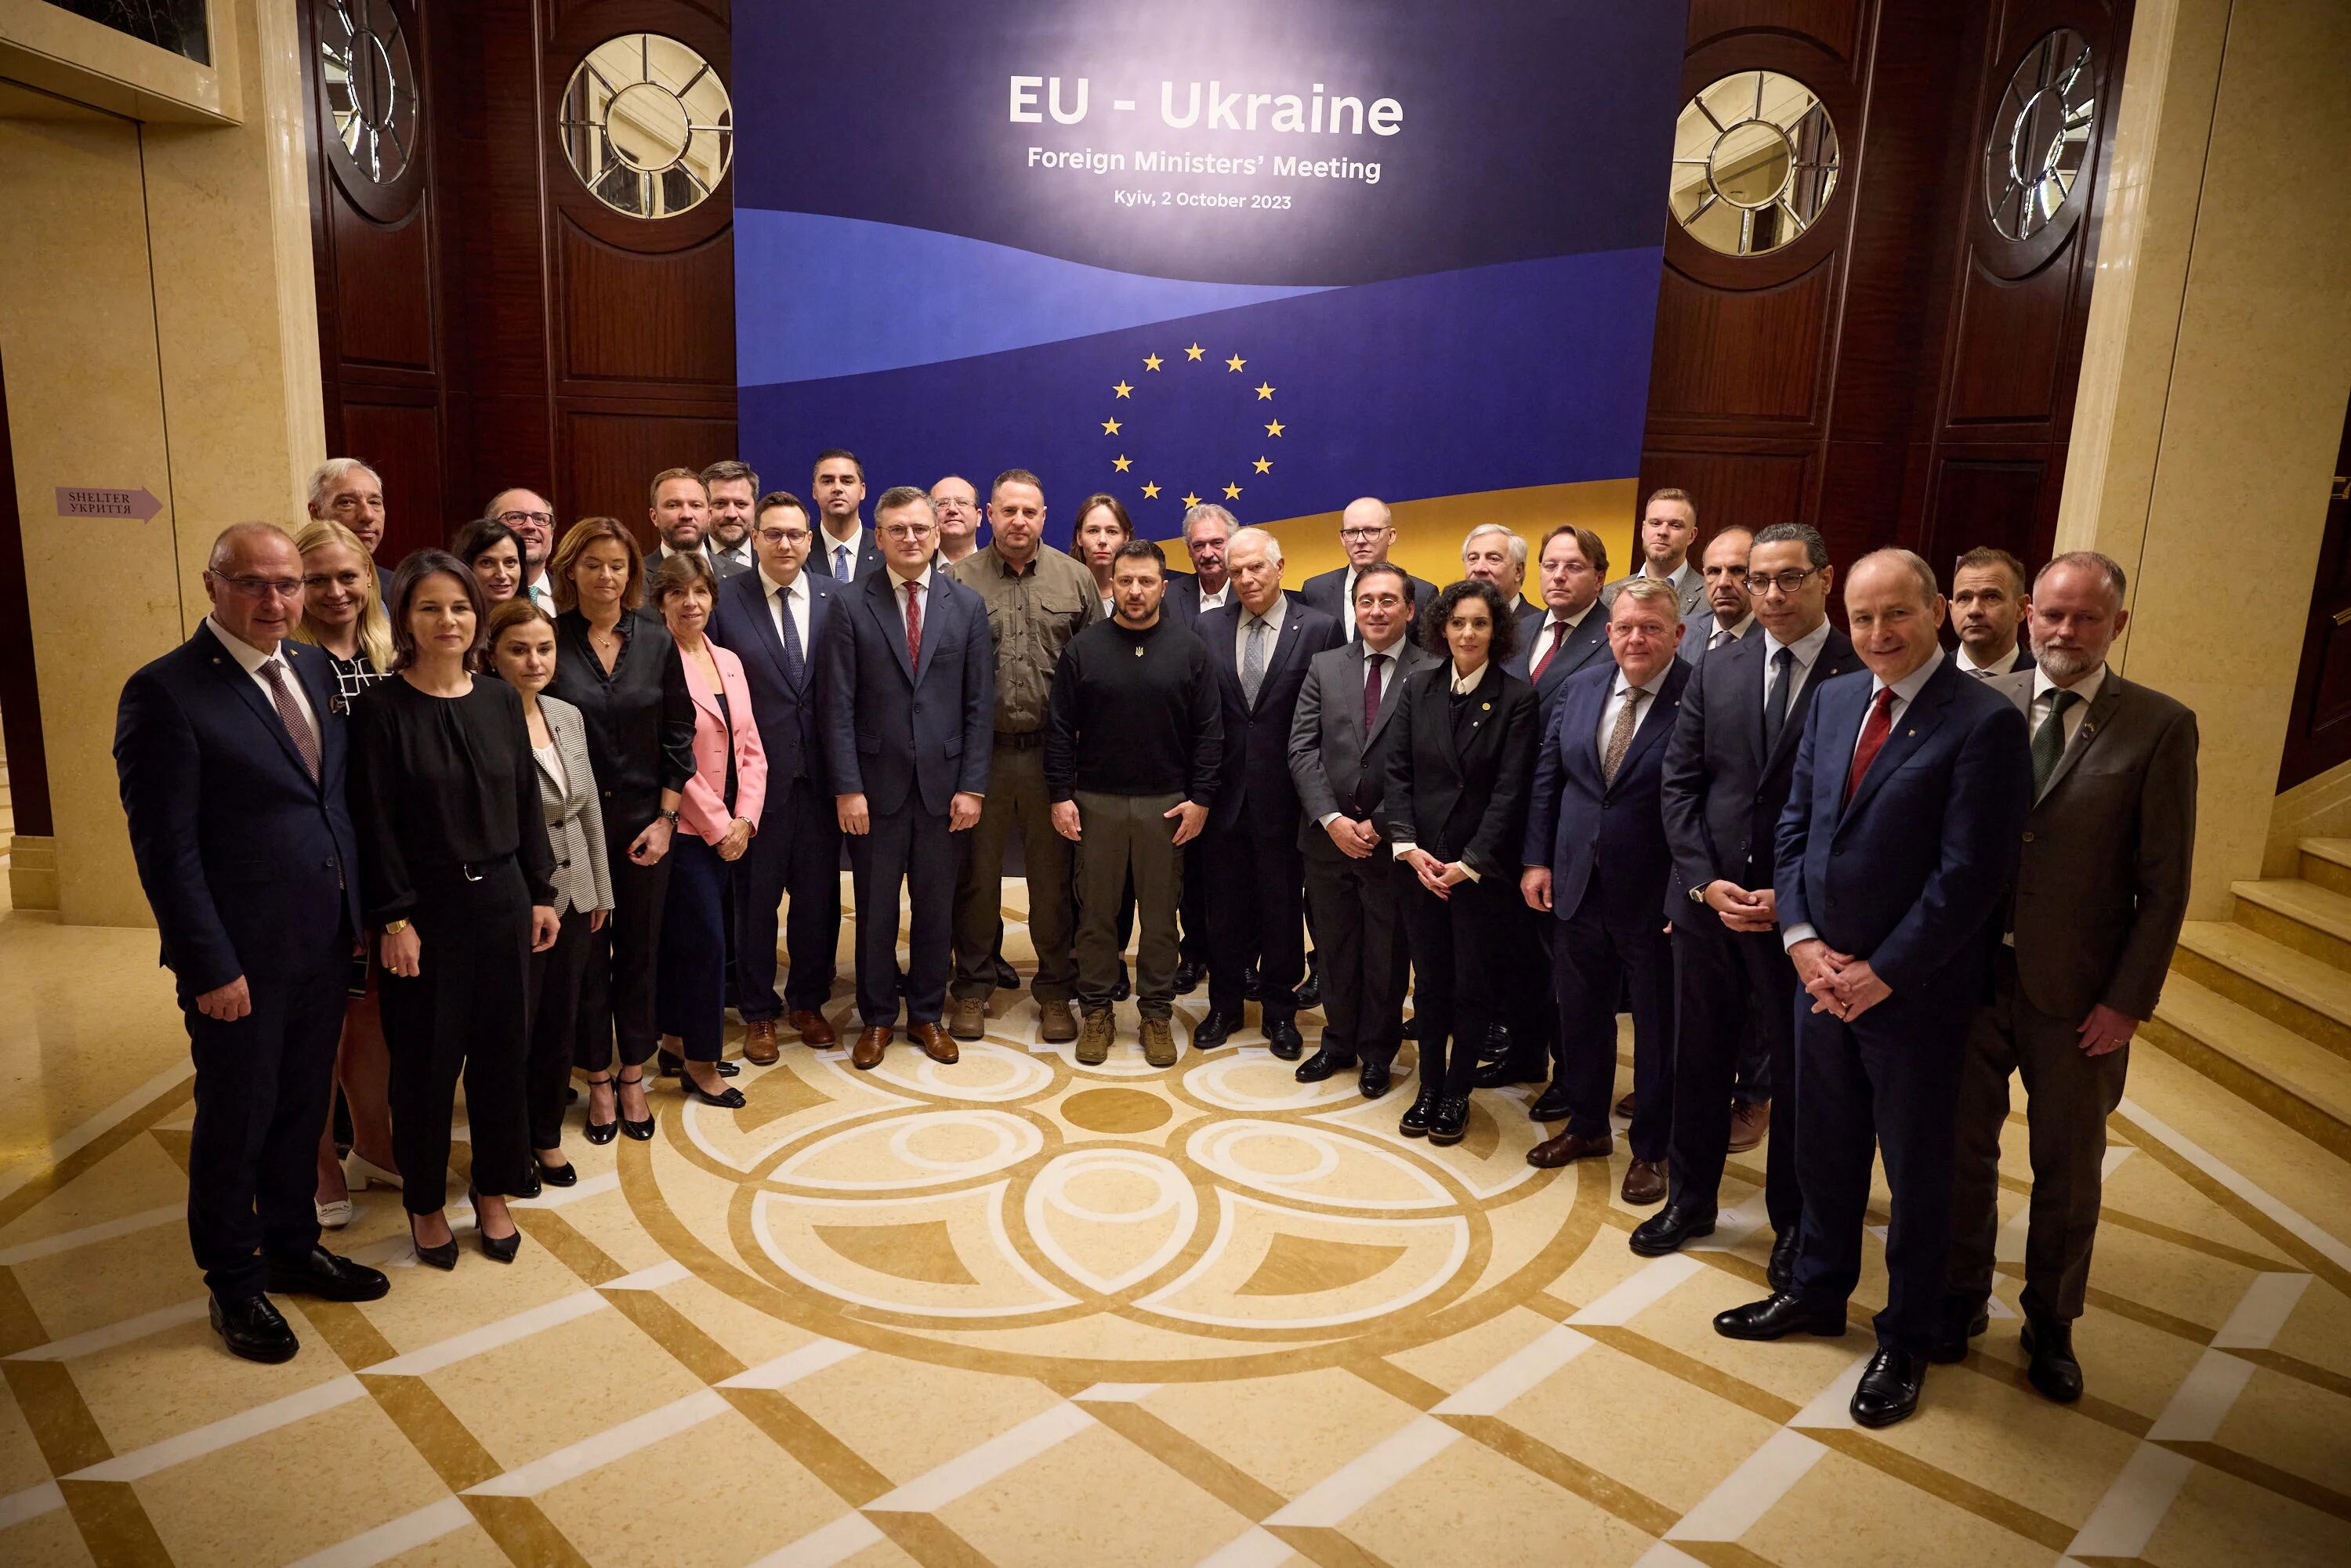 Ukraine's President Volodymyr Zelenskiy and EU foreign ministers pose for a picture during a EU-Ukraine foreign ministers meeting, amid Russia's attack on Ukraine, in Kyiv, Ukraine October 2, 2023. Ukrainian Presidential Press Service/Handout via REUTERS ATTENTION EDITORS - THIS IMAGE HAS BEEN SUPPLIED BY A THIRD PARTY.